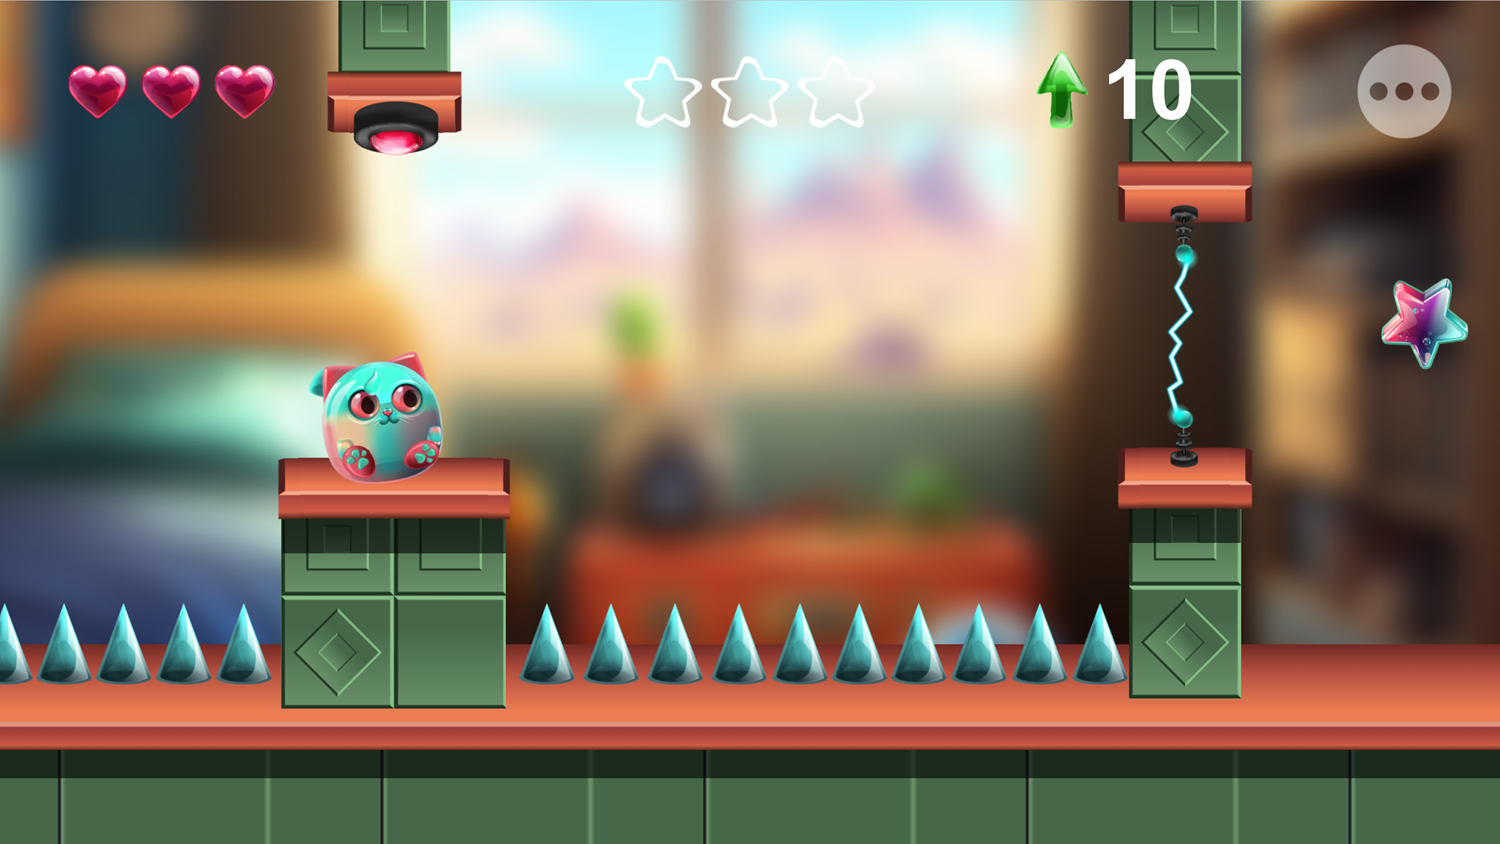 Fluffy Jelly Cat Game Level With a Voltage Button Screenshot.